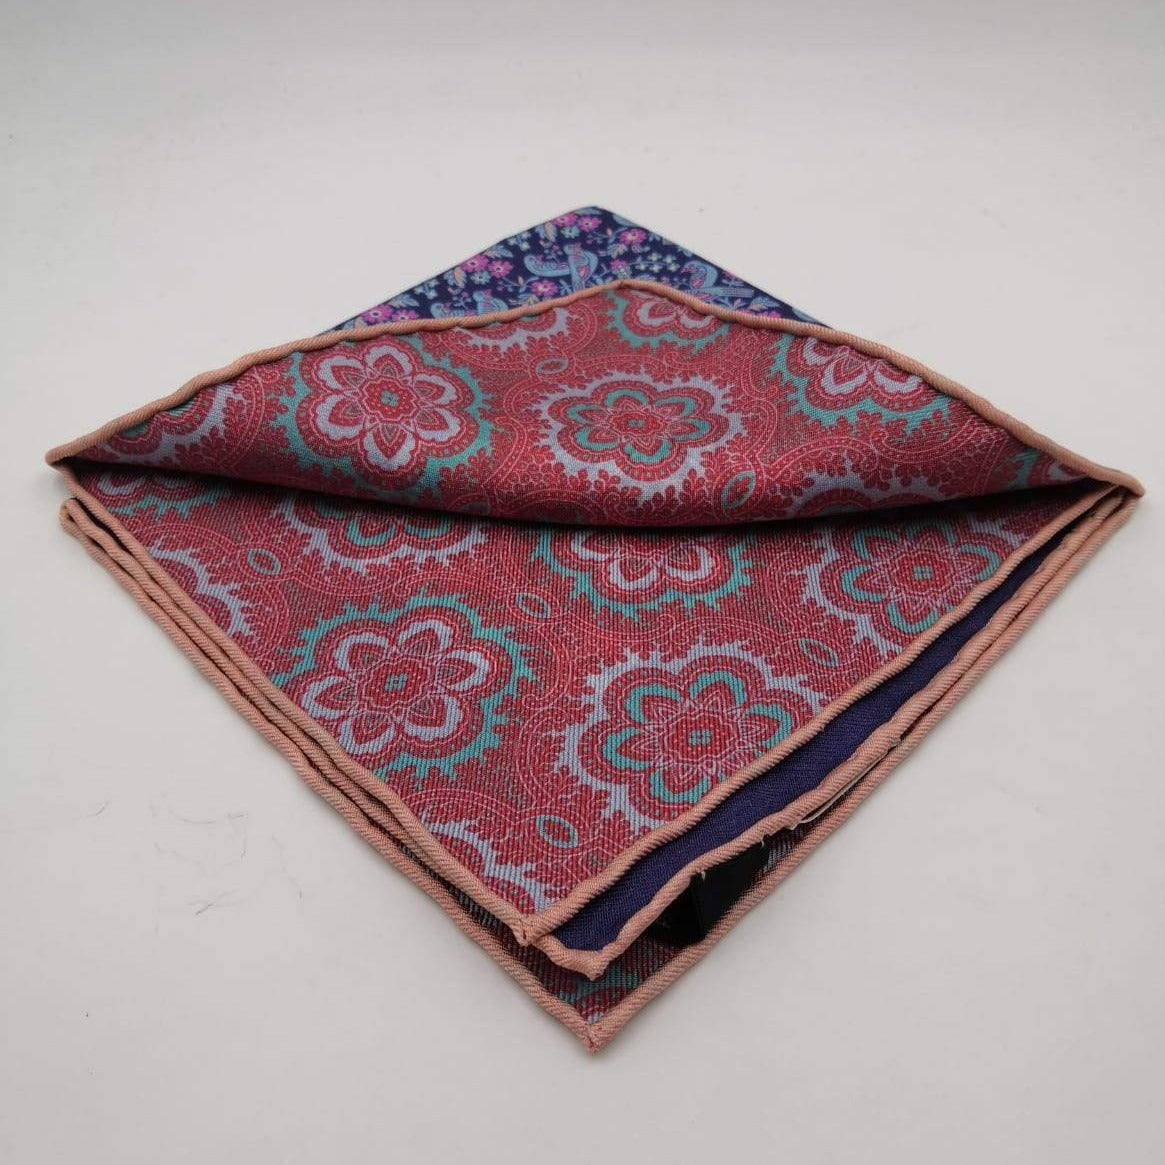 Cruciani & Bella Hand-rolled   100% Silk Blue and Pink Double Faces Patterned  Motif  Pocket Square Made in England 31 cm X 31 cm #5738